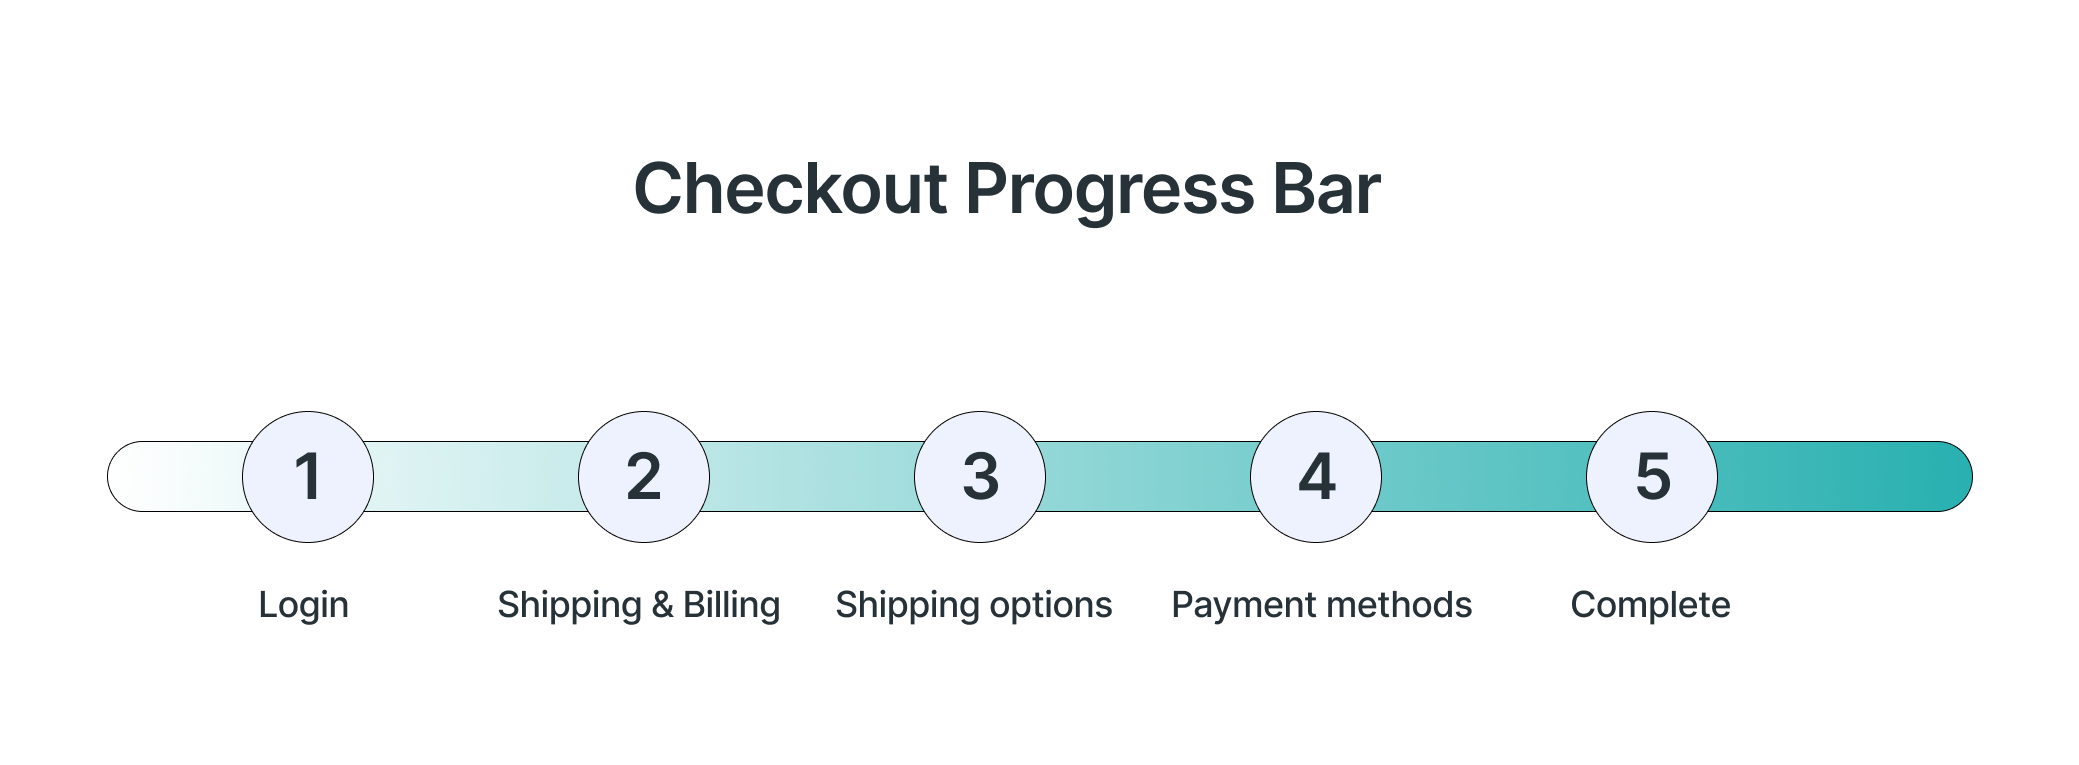 you can reduce cart abandonments by showing checkout progress bar